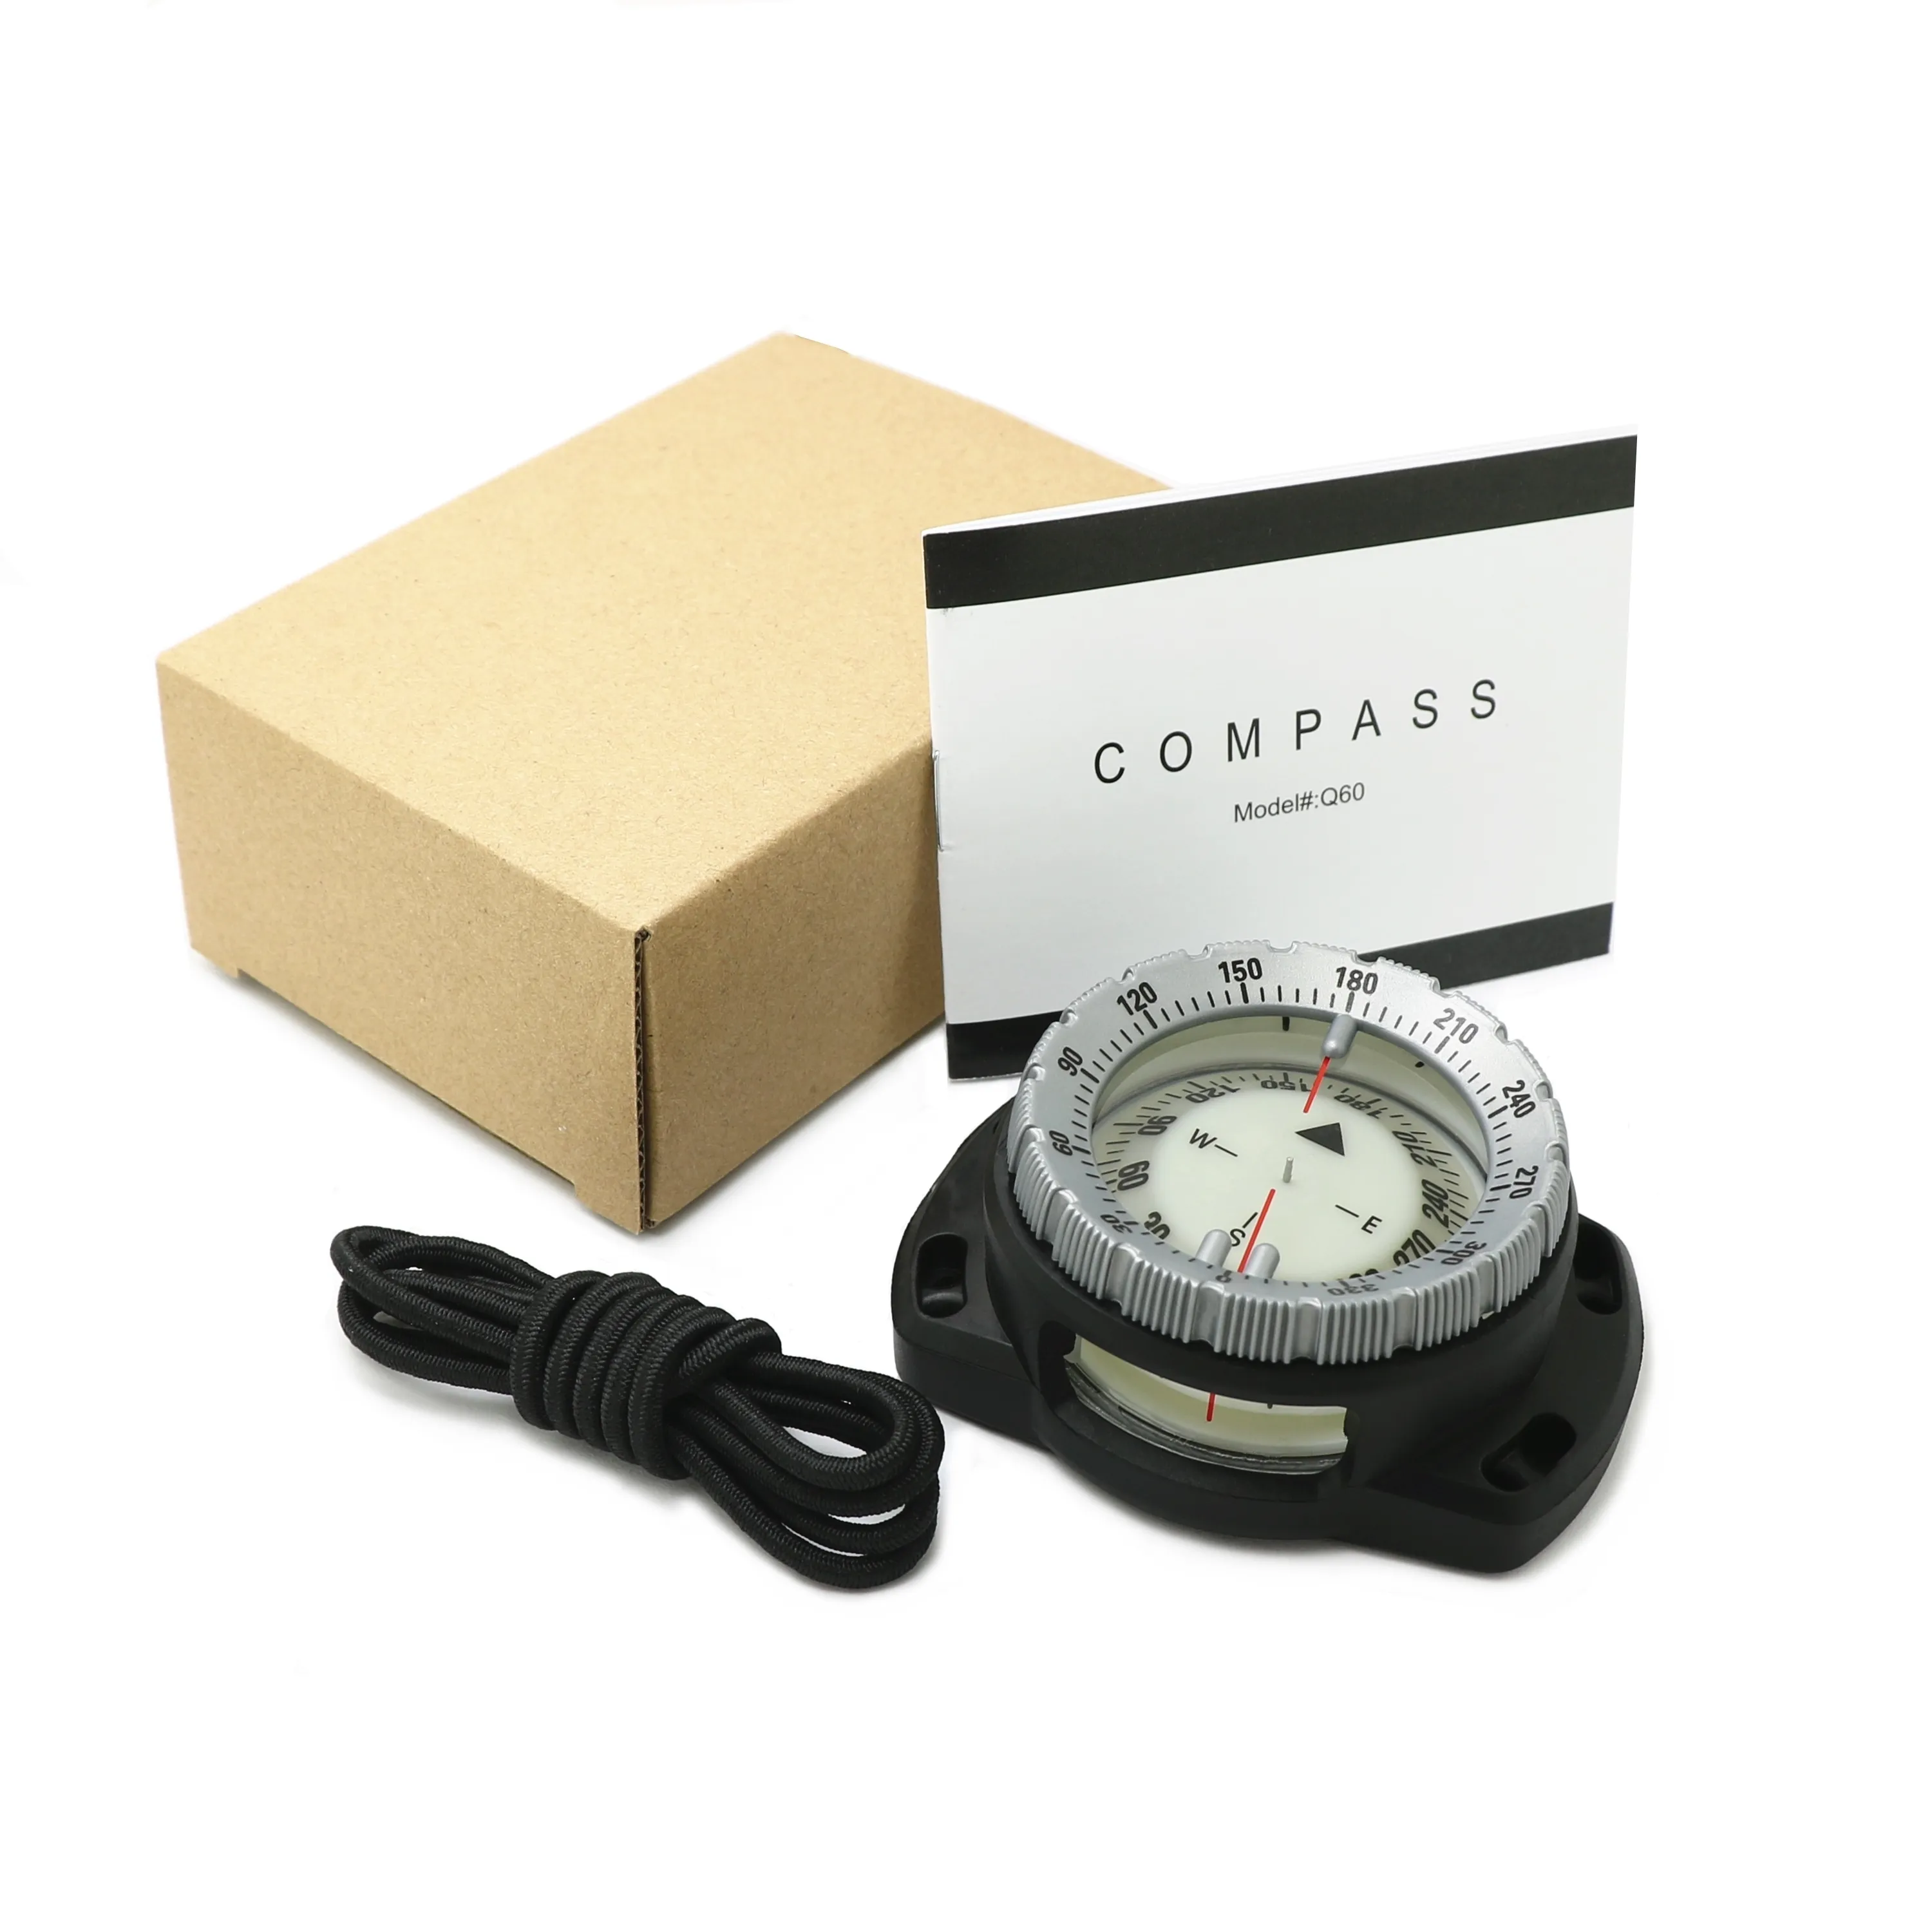 New diving equipment Outdoor diving compass light up at night Wrist Survival Emergency compass watch